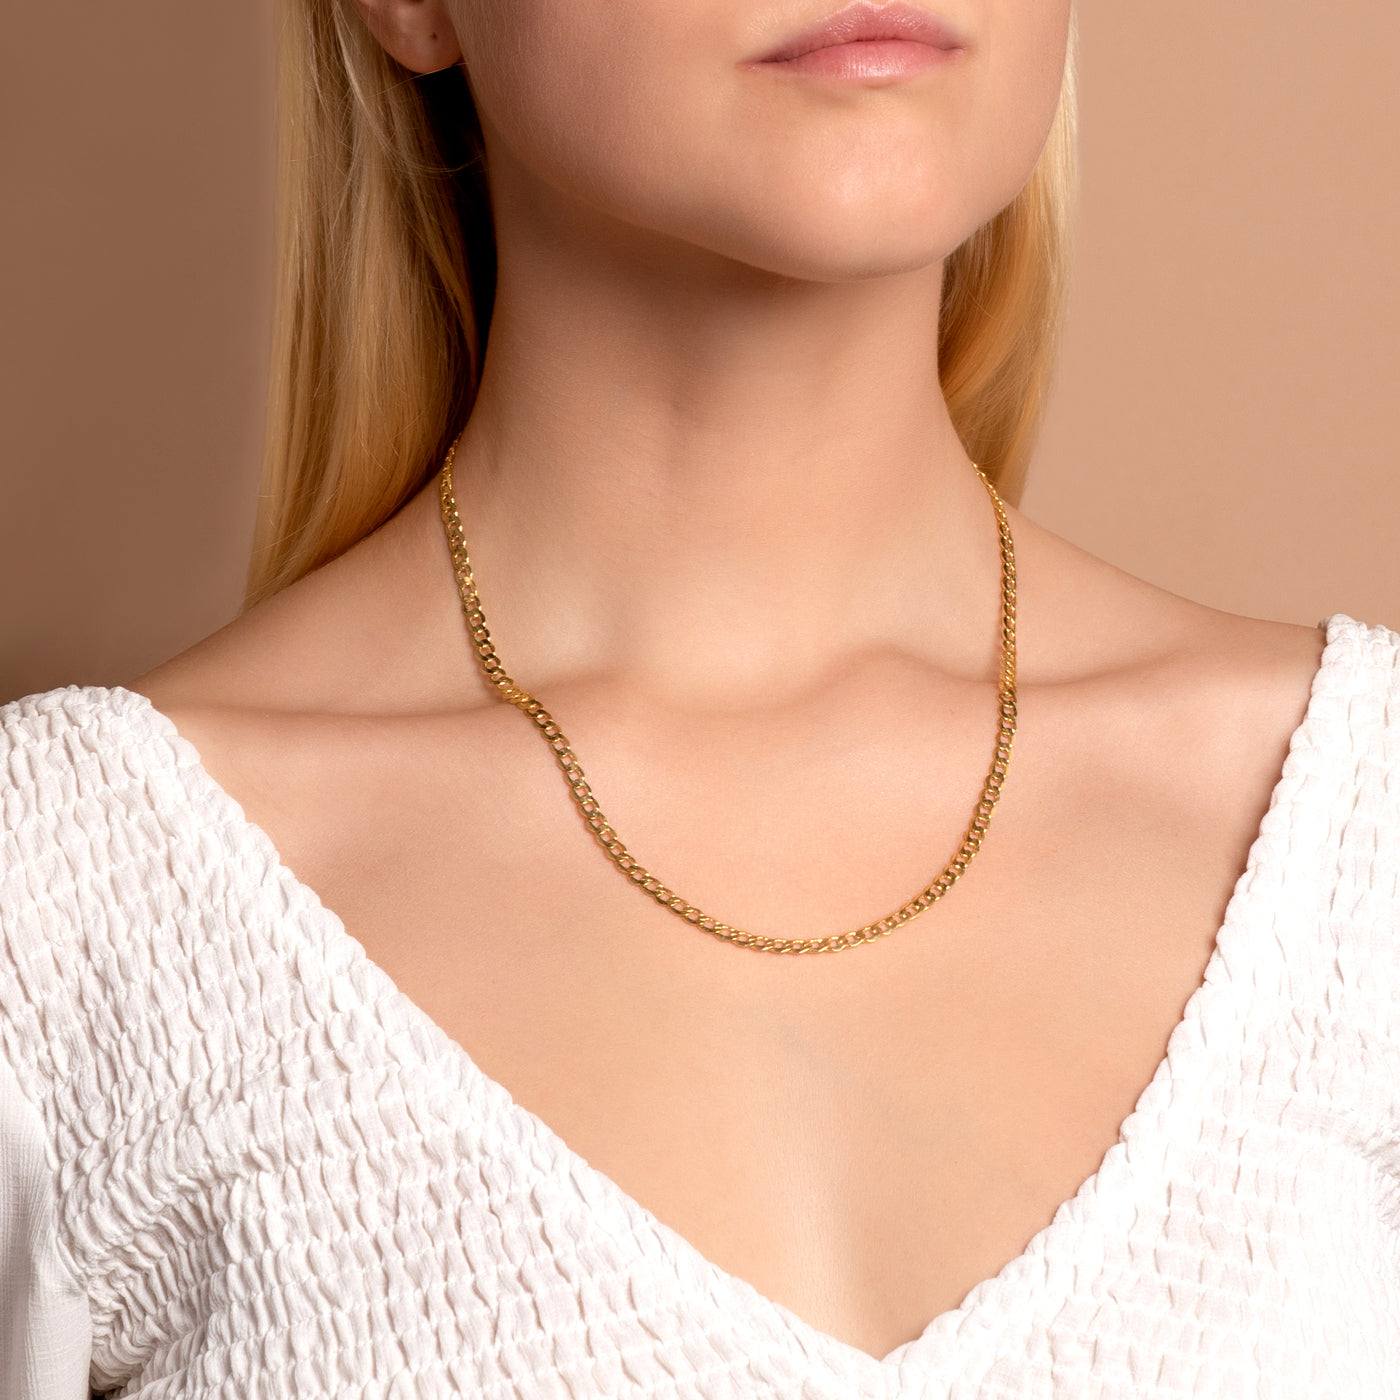 14K GOLD BOLD CURB CHAIN NECKLACE